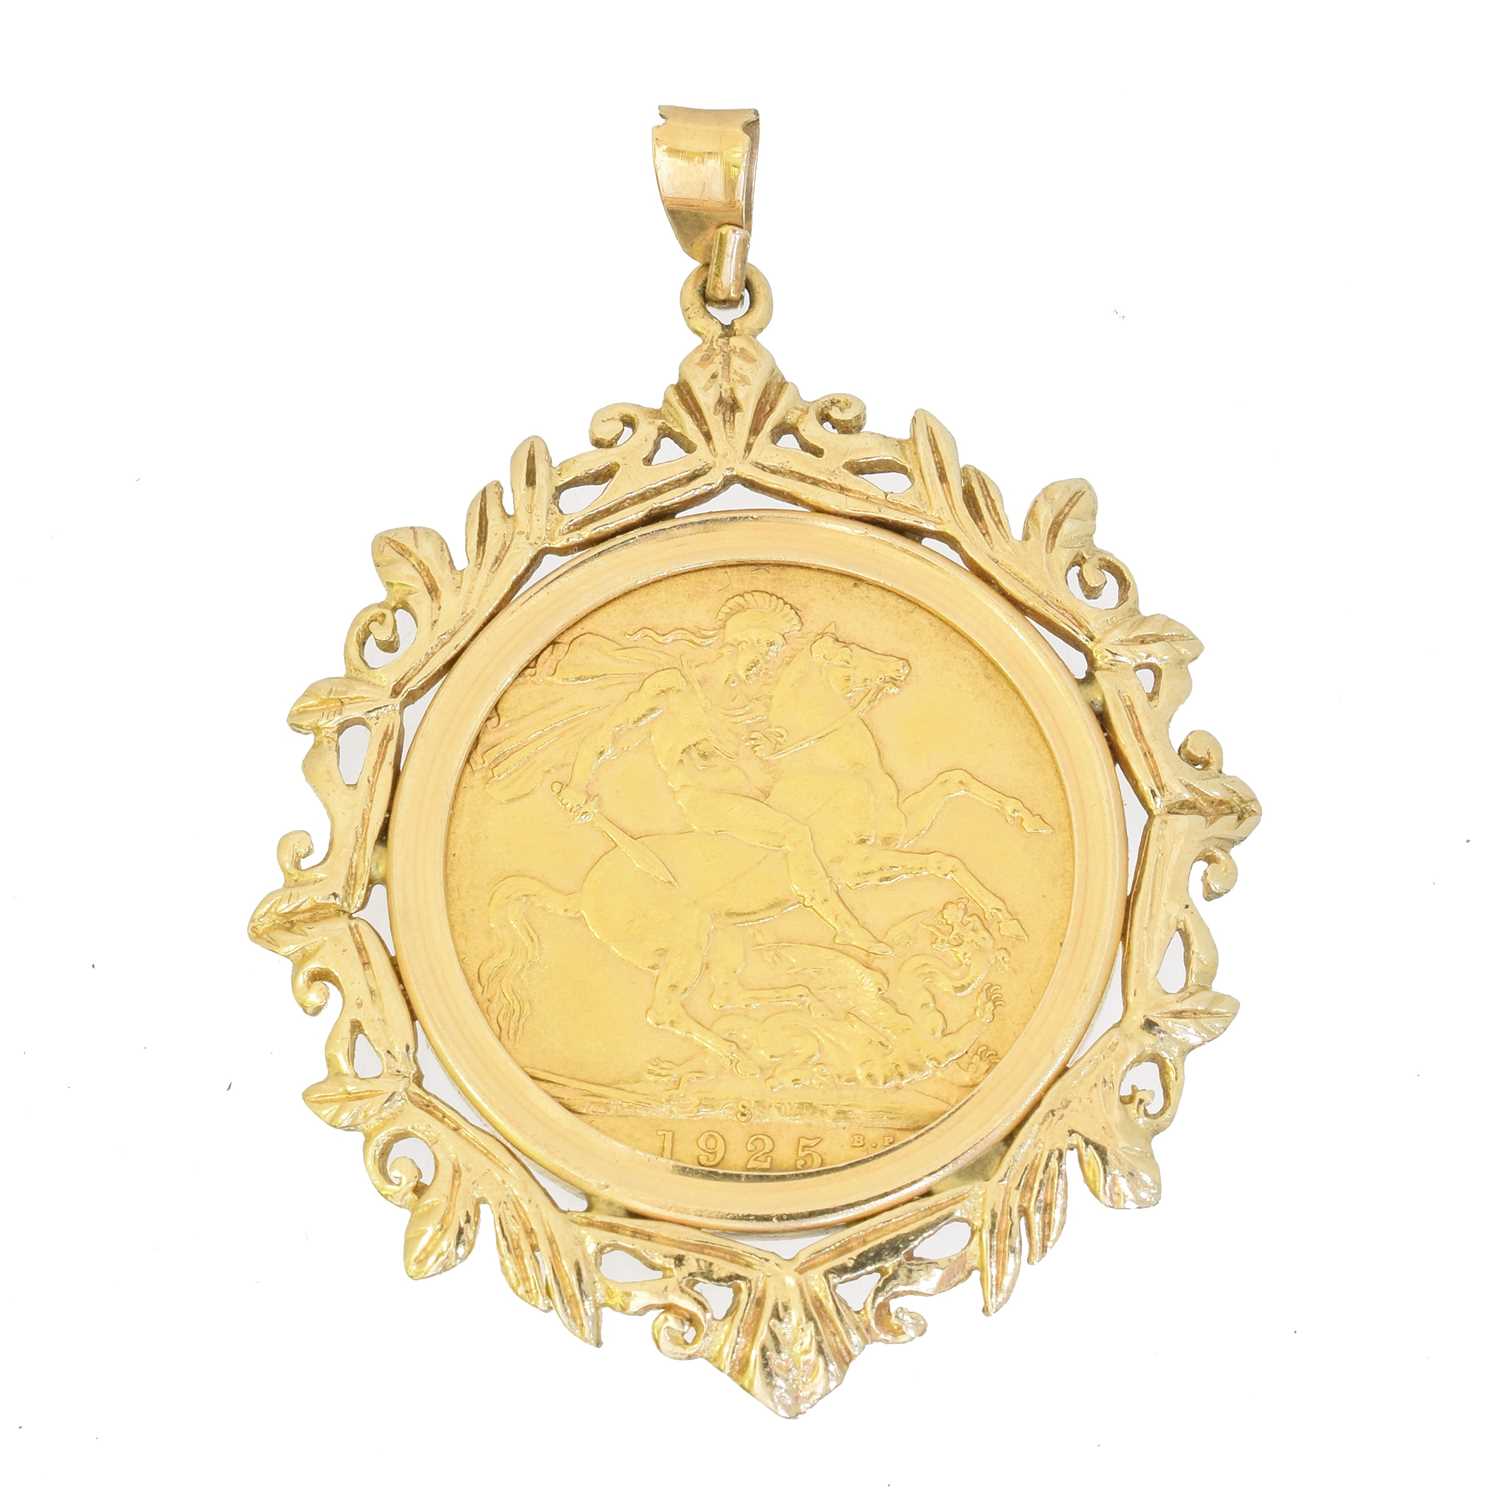 Lot 53 - A George V sovereign